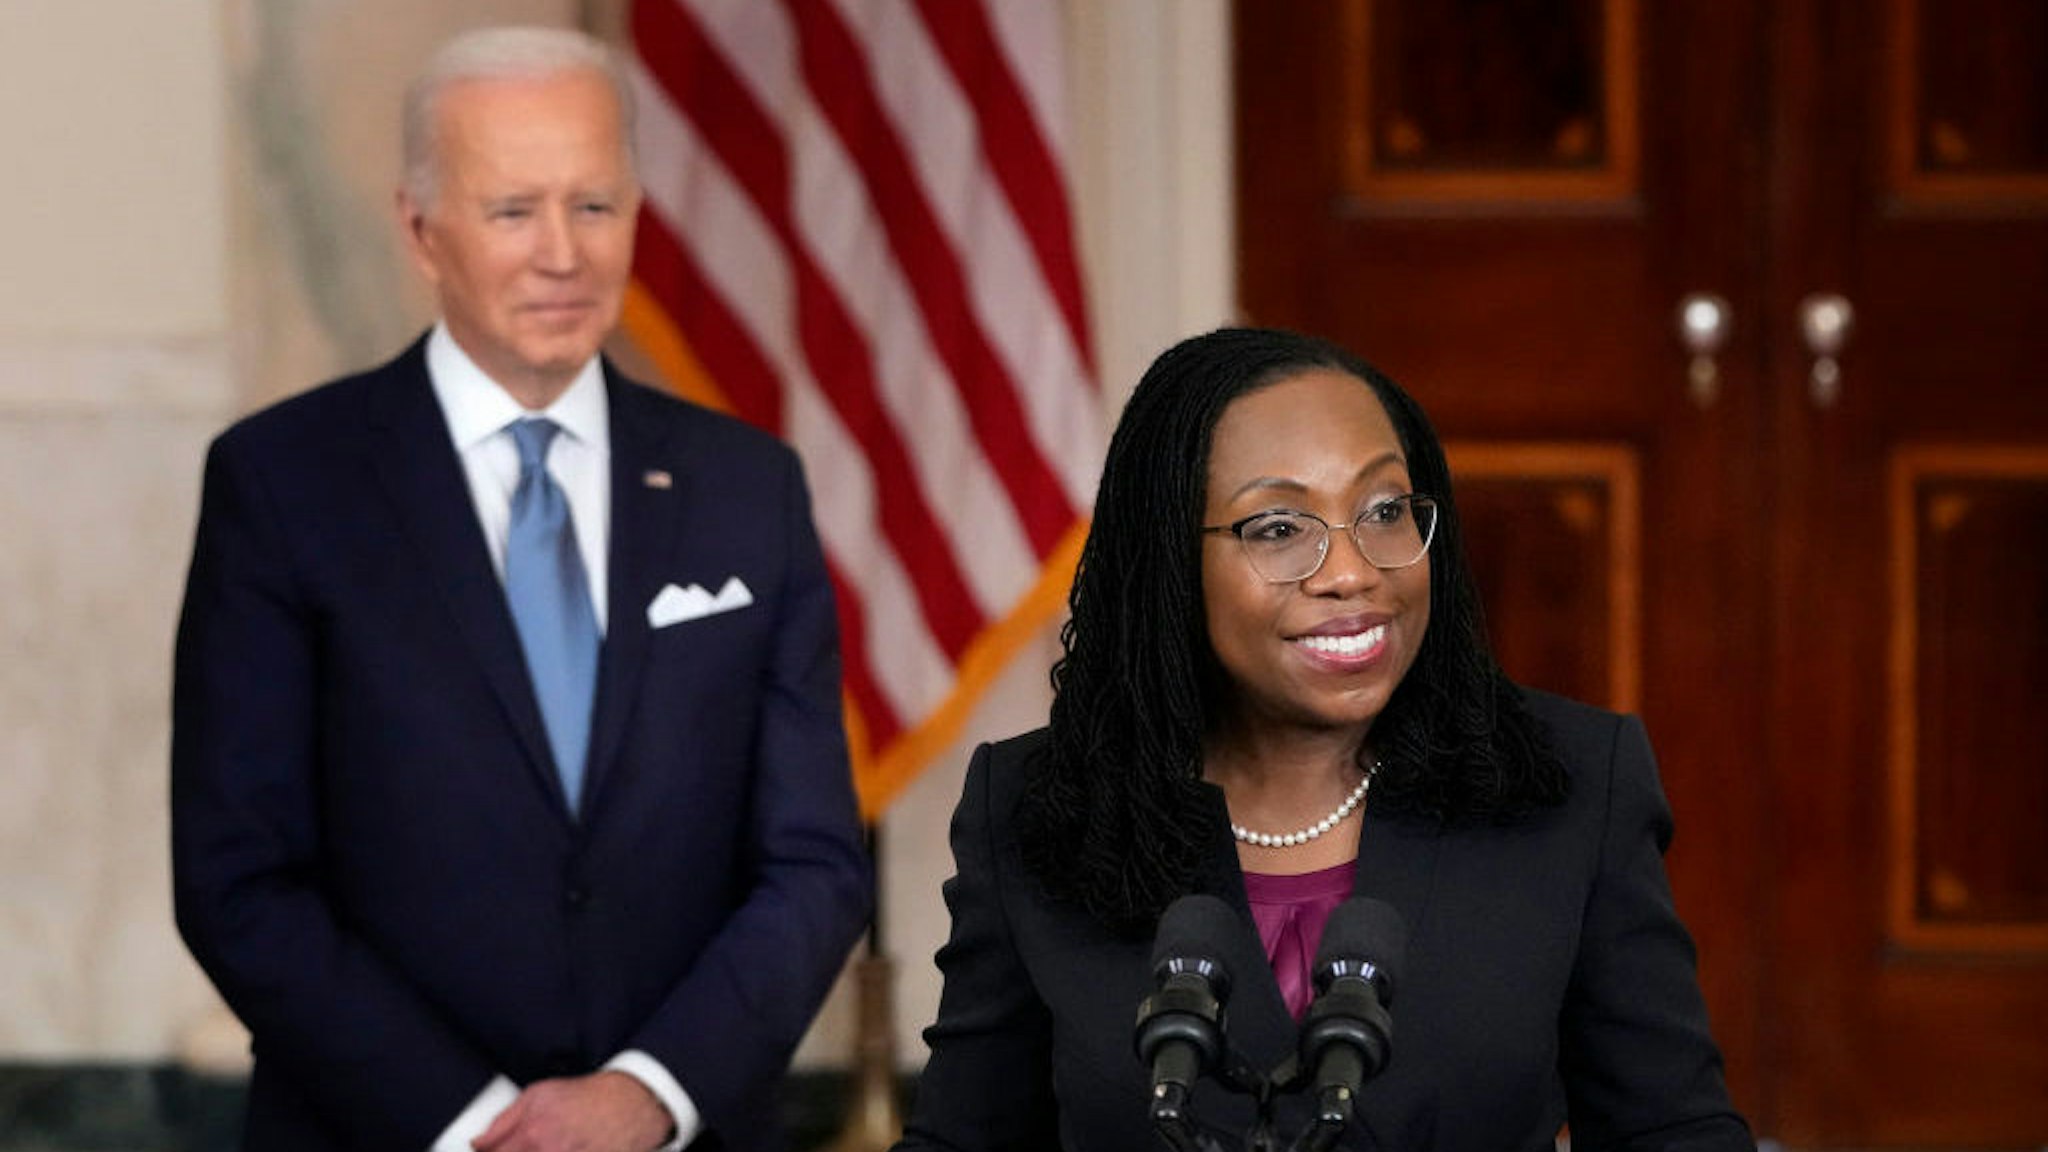 WASHINGTON, DC - FEBRUARY 25: Ketanji Brown Jackson, circuit judge on the U.S. Court of Appeals for the District of Columbia Circuit, makes brief remarks after U.S. President Joe Biden introduced her as his nominee to the U.S. Supreme Court during an event in the Cross Hall of the White House February 25, 2022 in Washington, DC. Pending confirmation, Judge Brown Jackson would succeed retiring Associate Justice Stephen Breyer and become the first-ever Black woman to serve on the high court. (Photo by Drew Angerer/Getty Images)